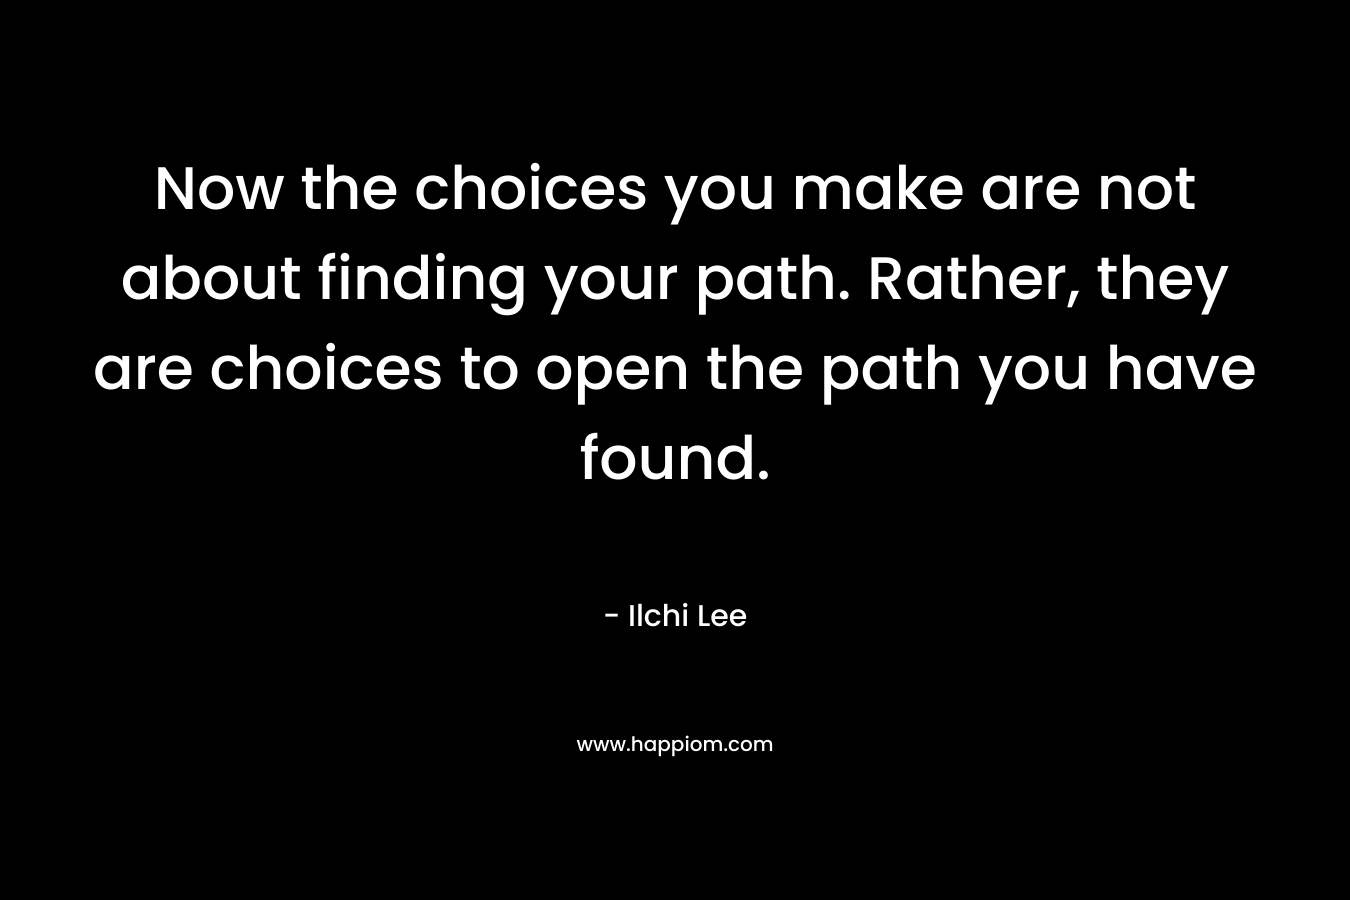 Now the choices you make are not about finding your path. Rather, they are choices to open the path you have found.